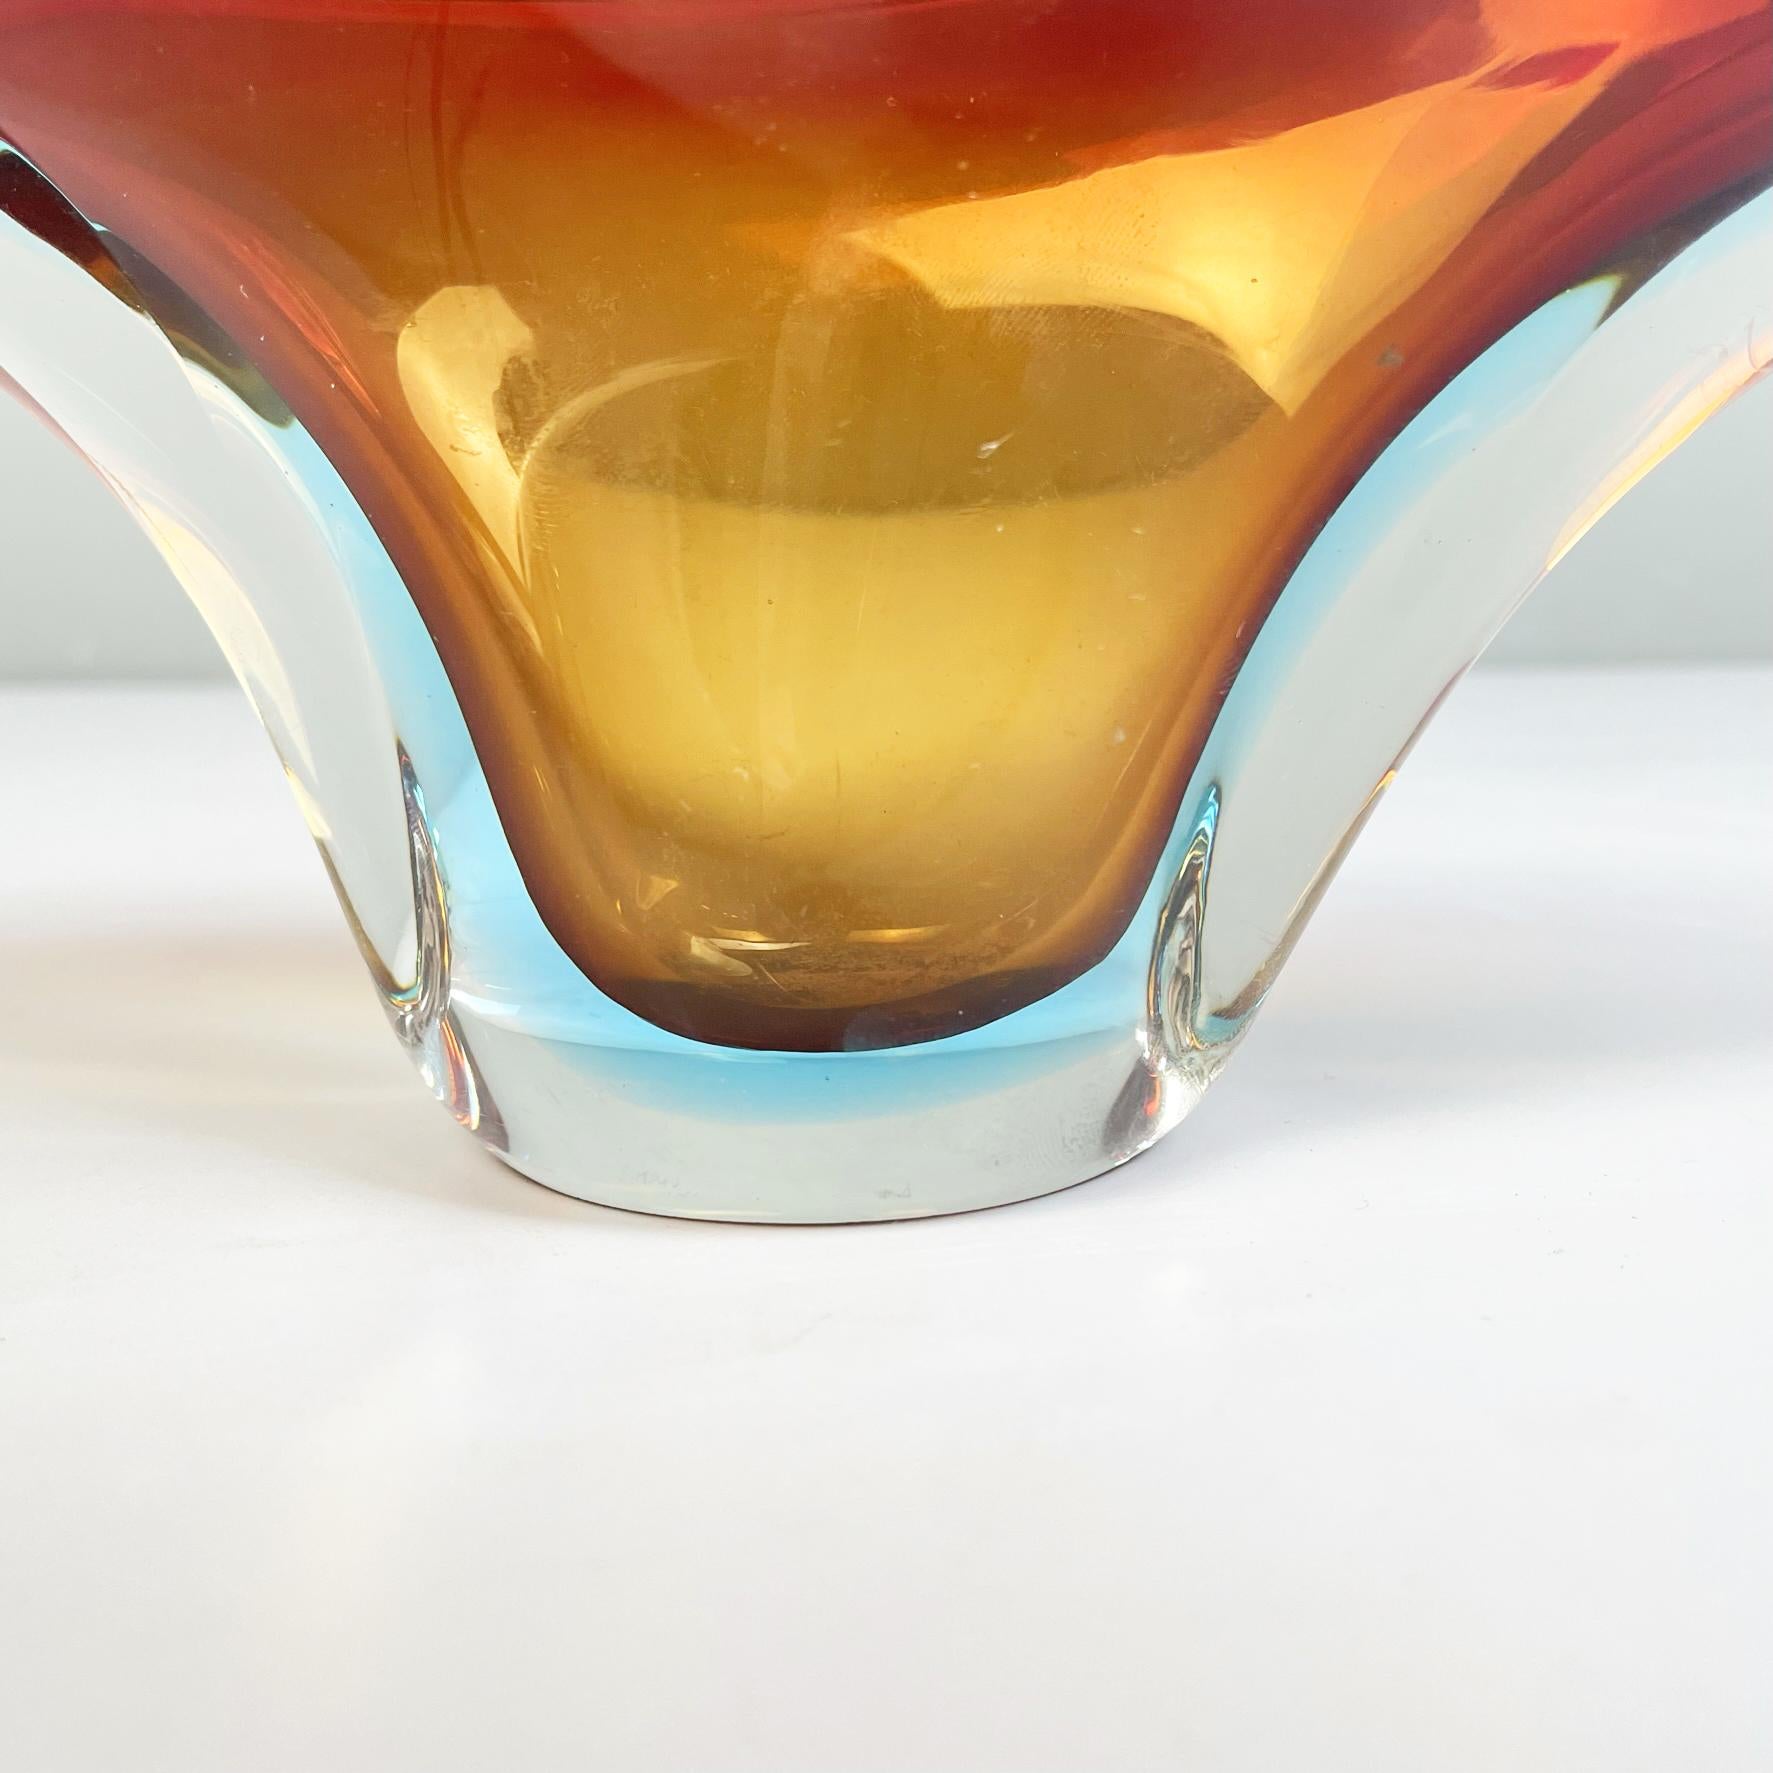 Italian Midcentury Centerpiece in Yellow, Red and Blue Murano Glass, 1960s For Sale 3